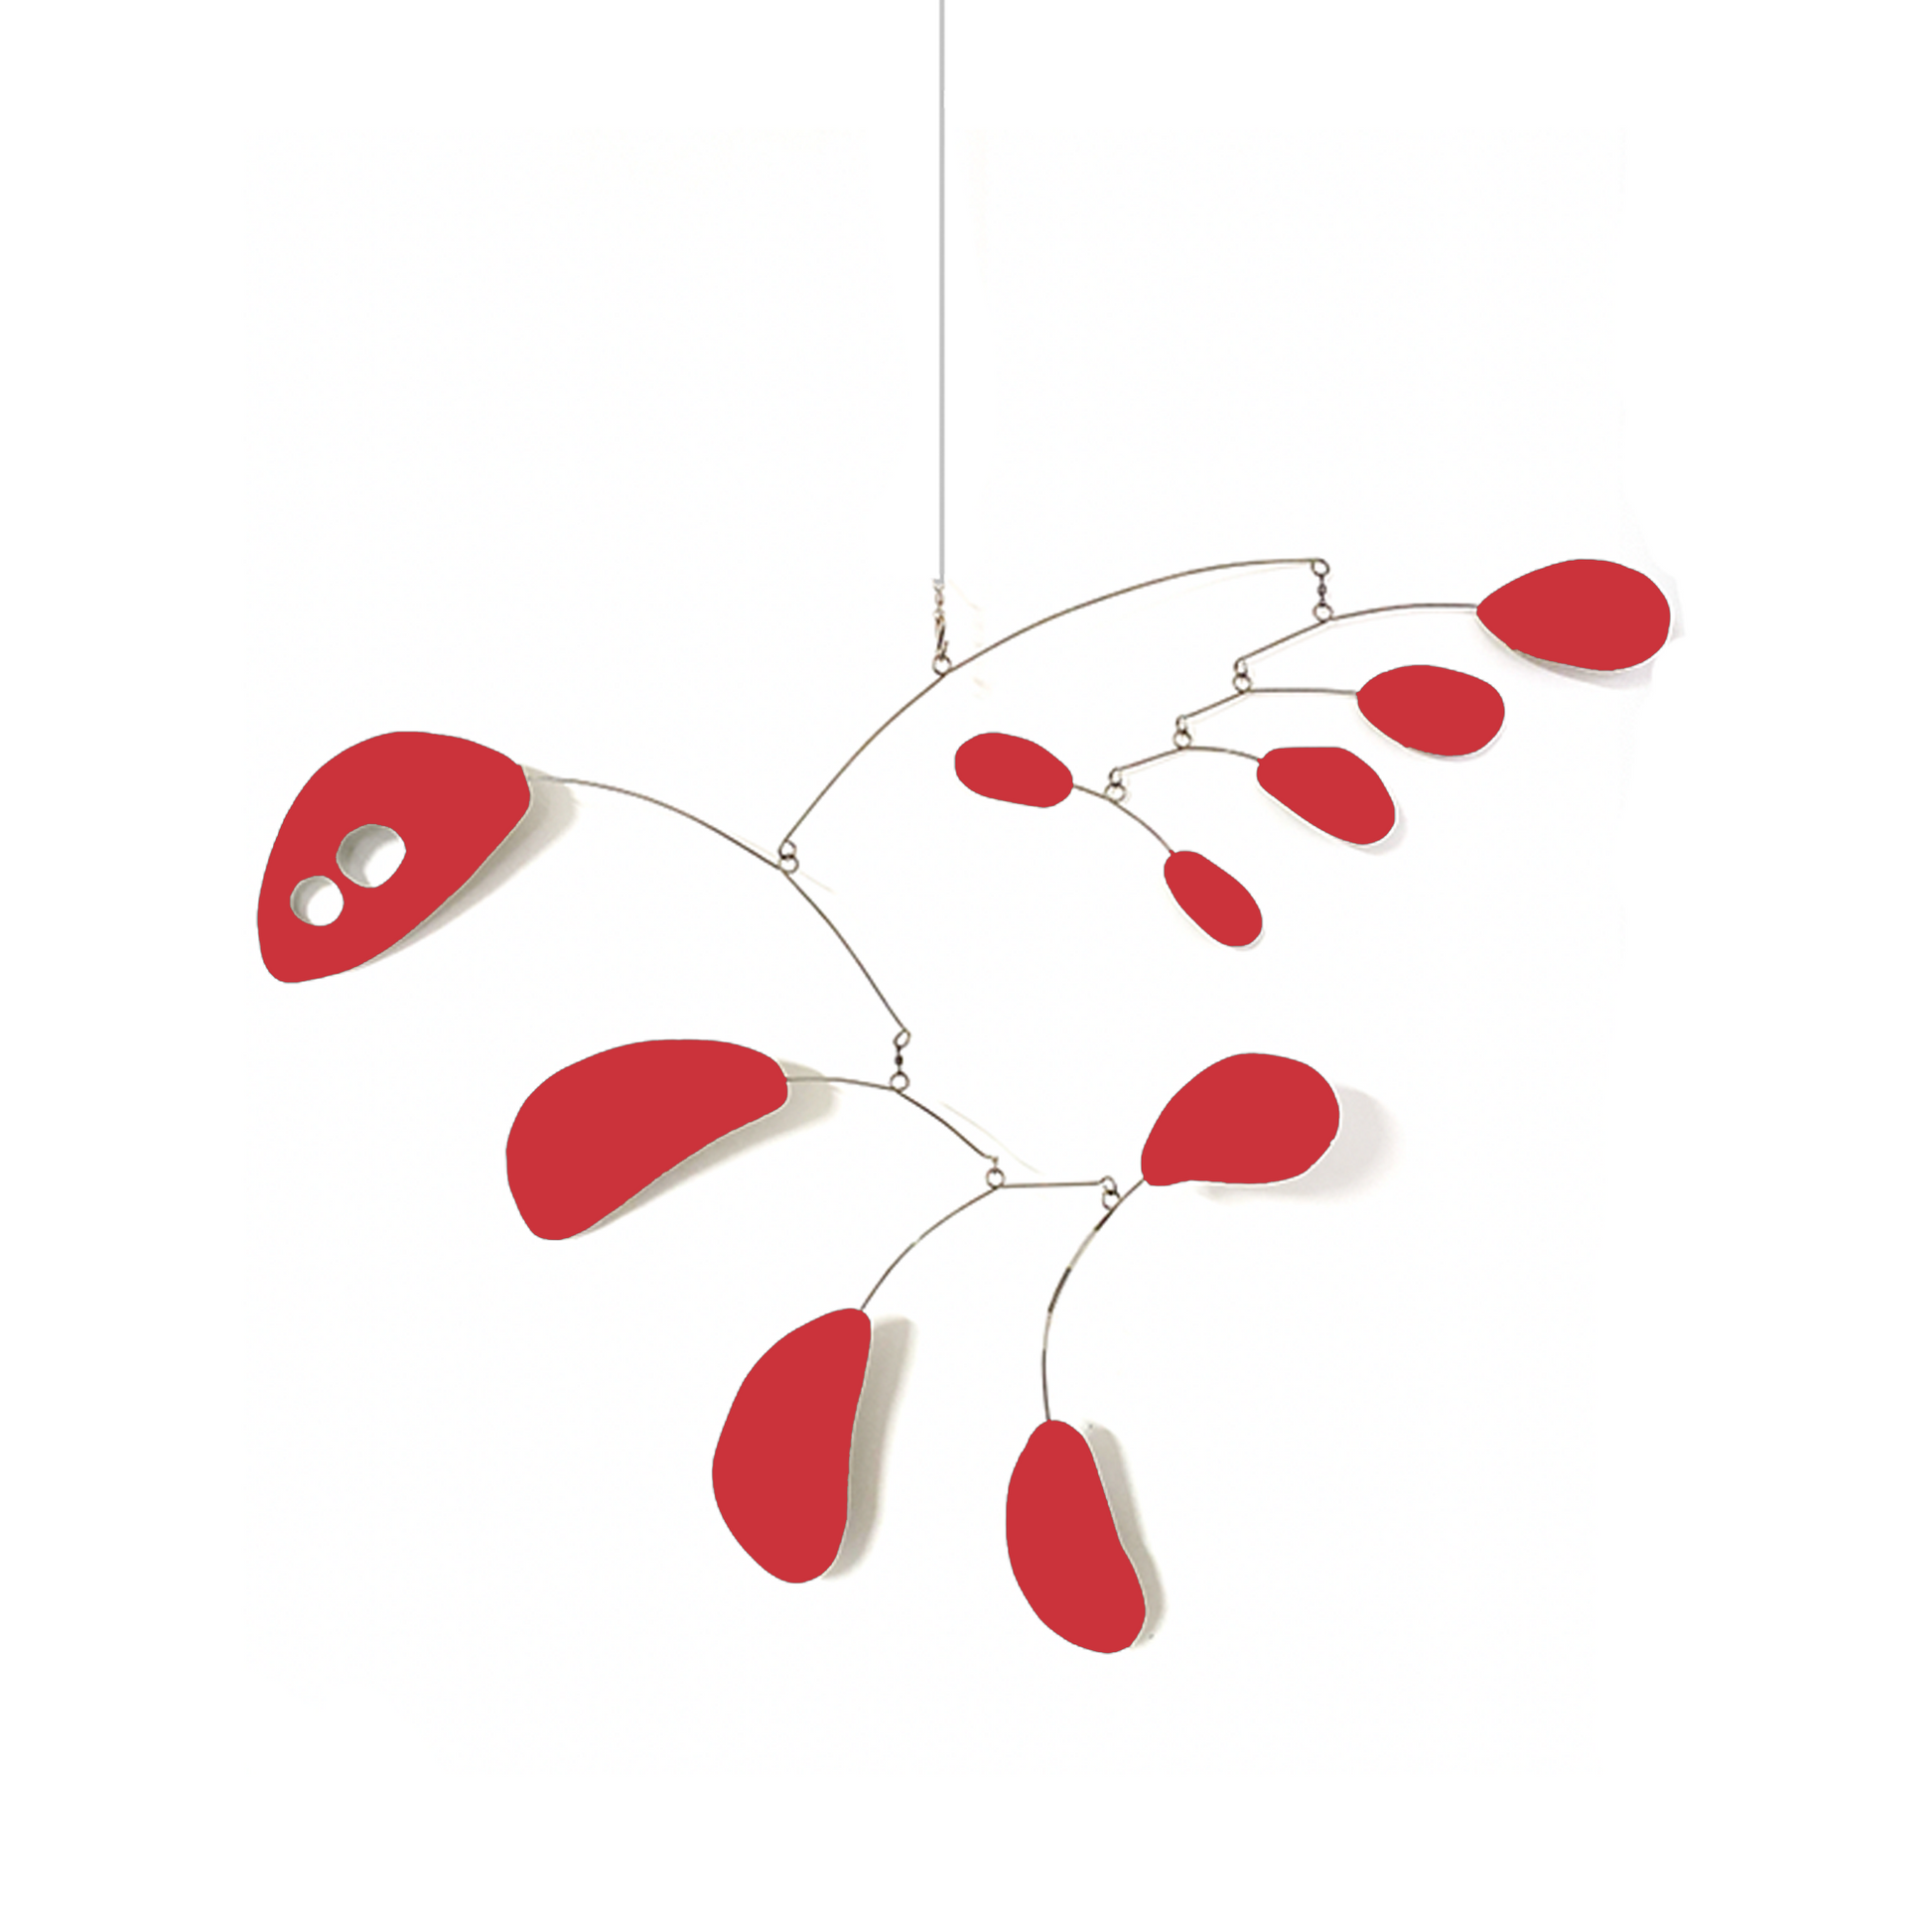 ModCat Mid Century Modern Kinetic Hanging Art Mobile in all red by AtomicMobiles.com